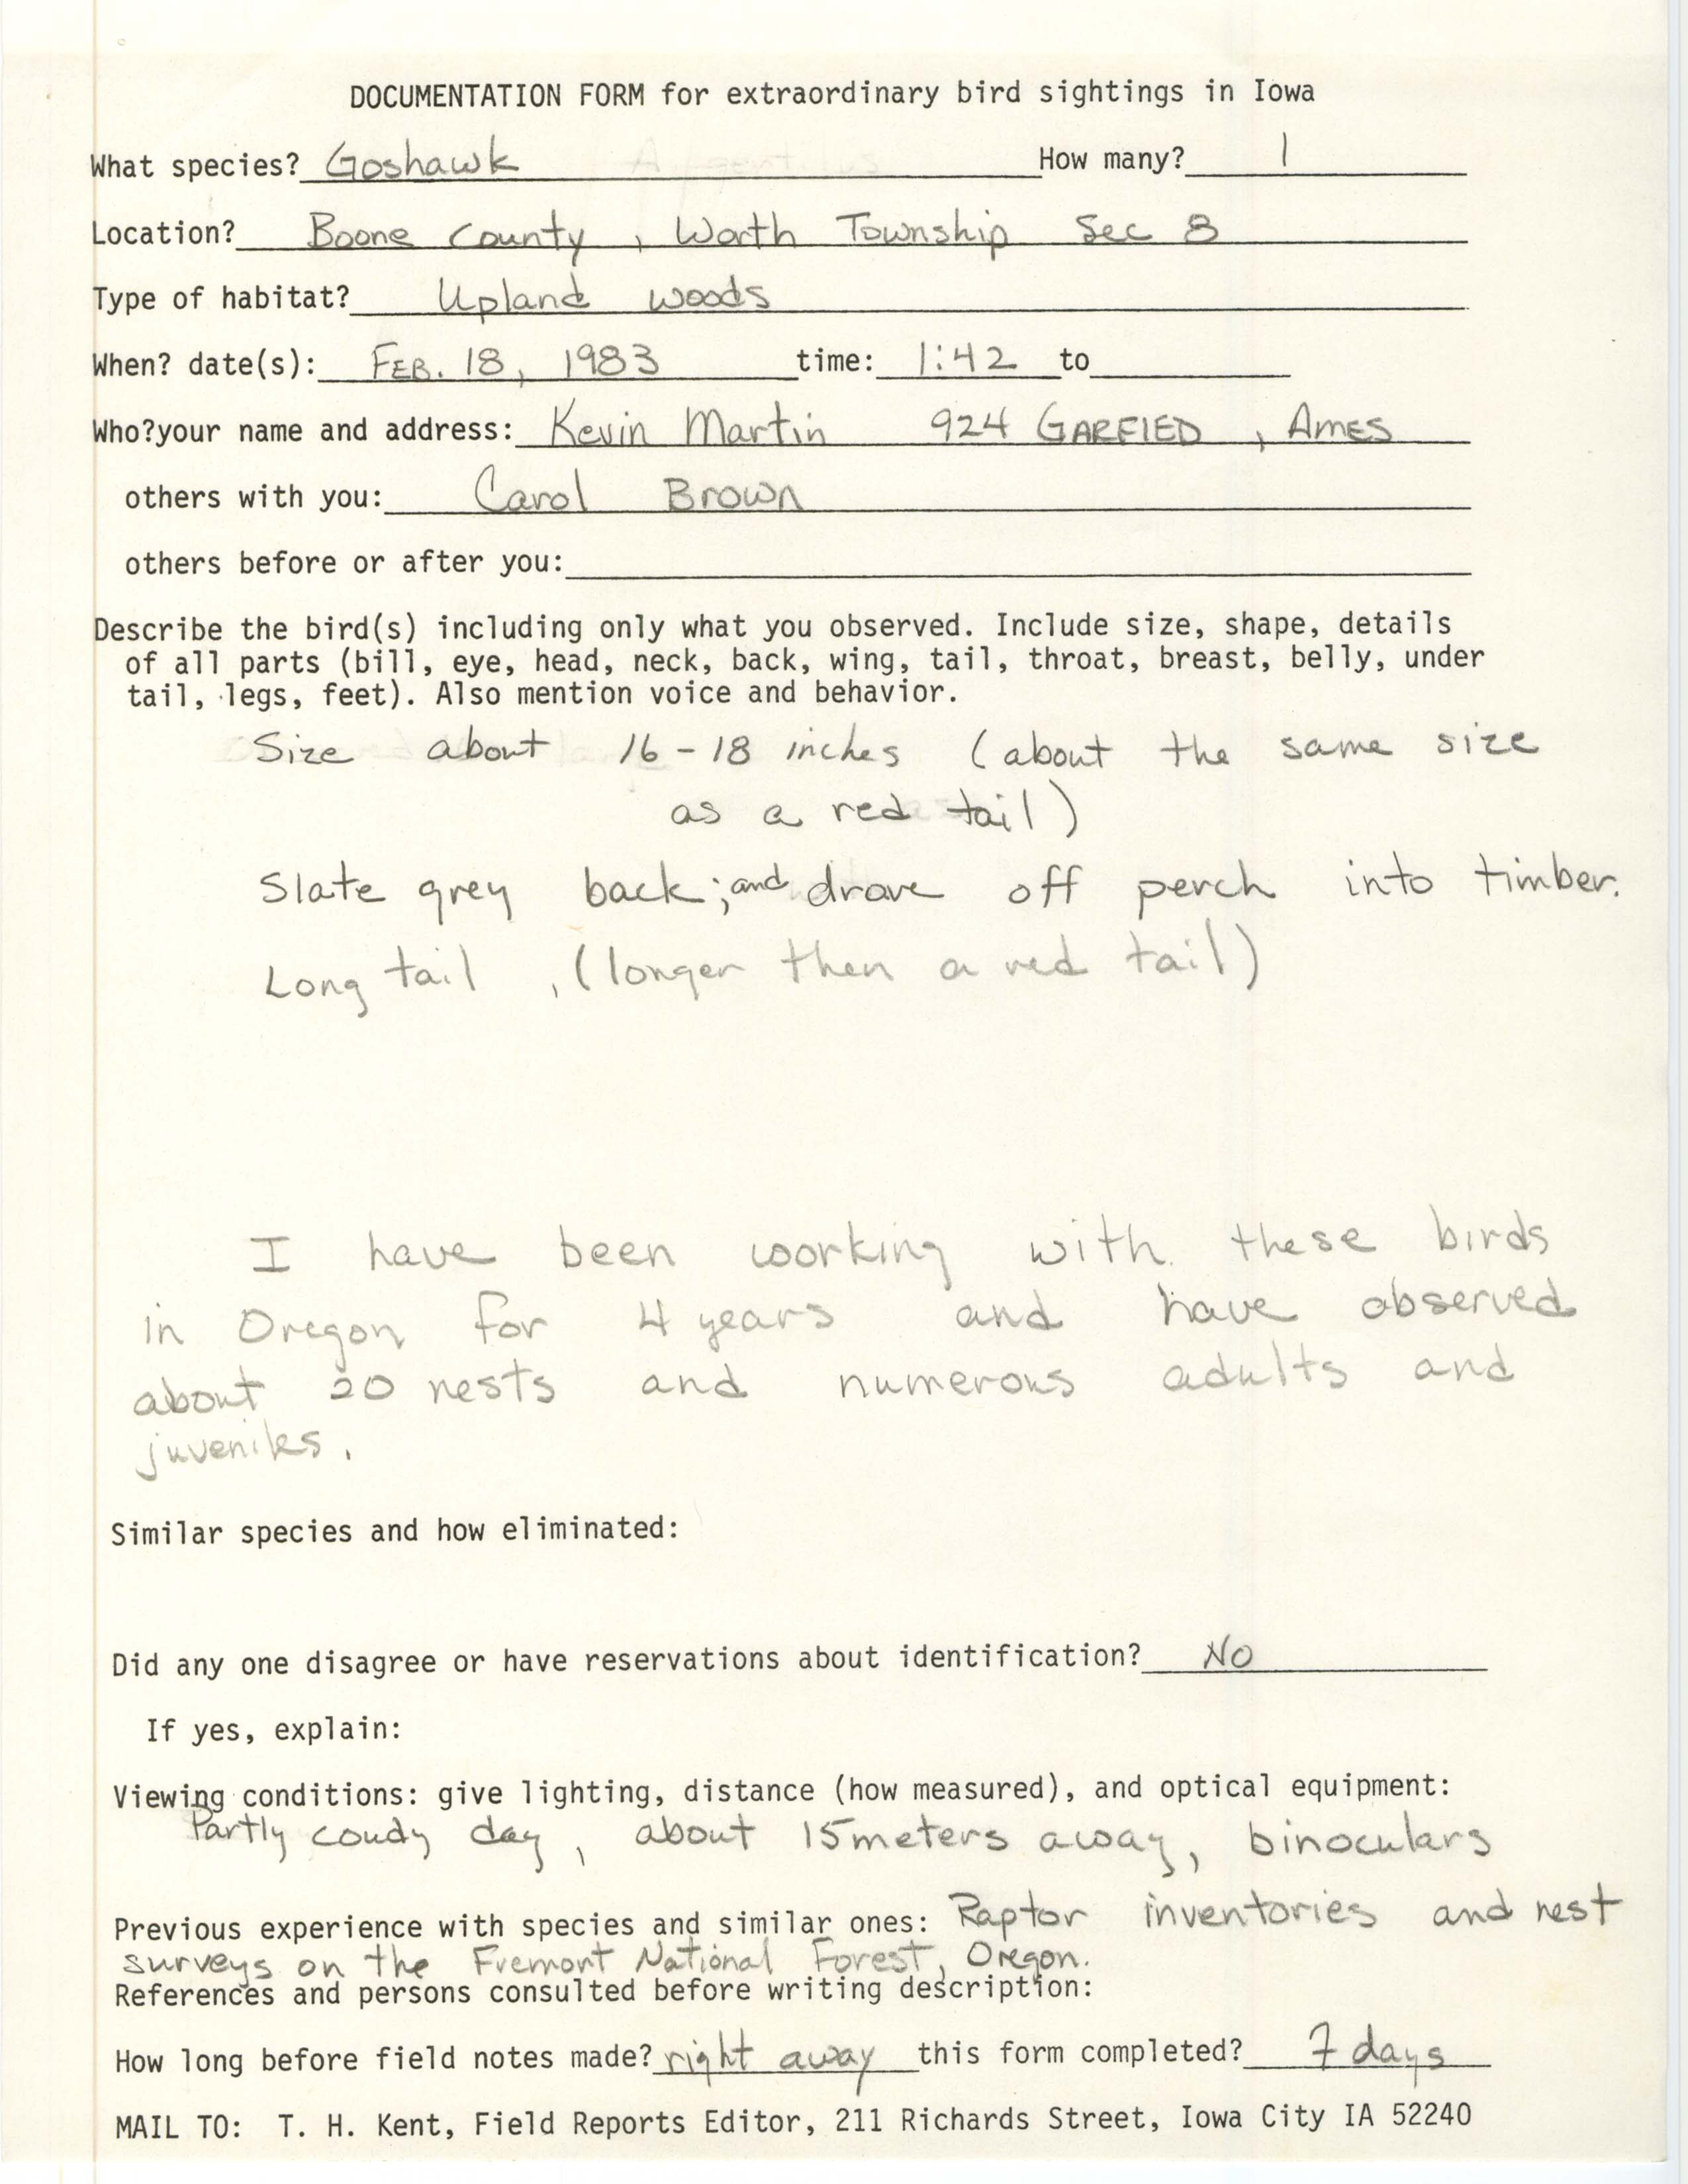 Rare bird documentation form for Northern Goshawk at Worth Township in Boone County, 1983